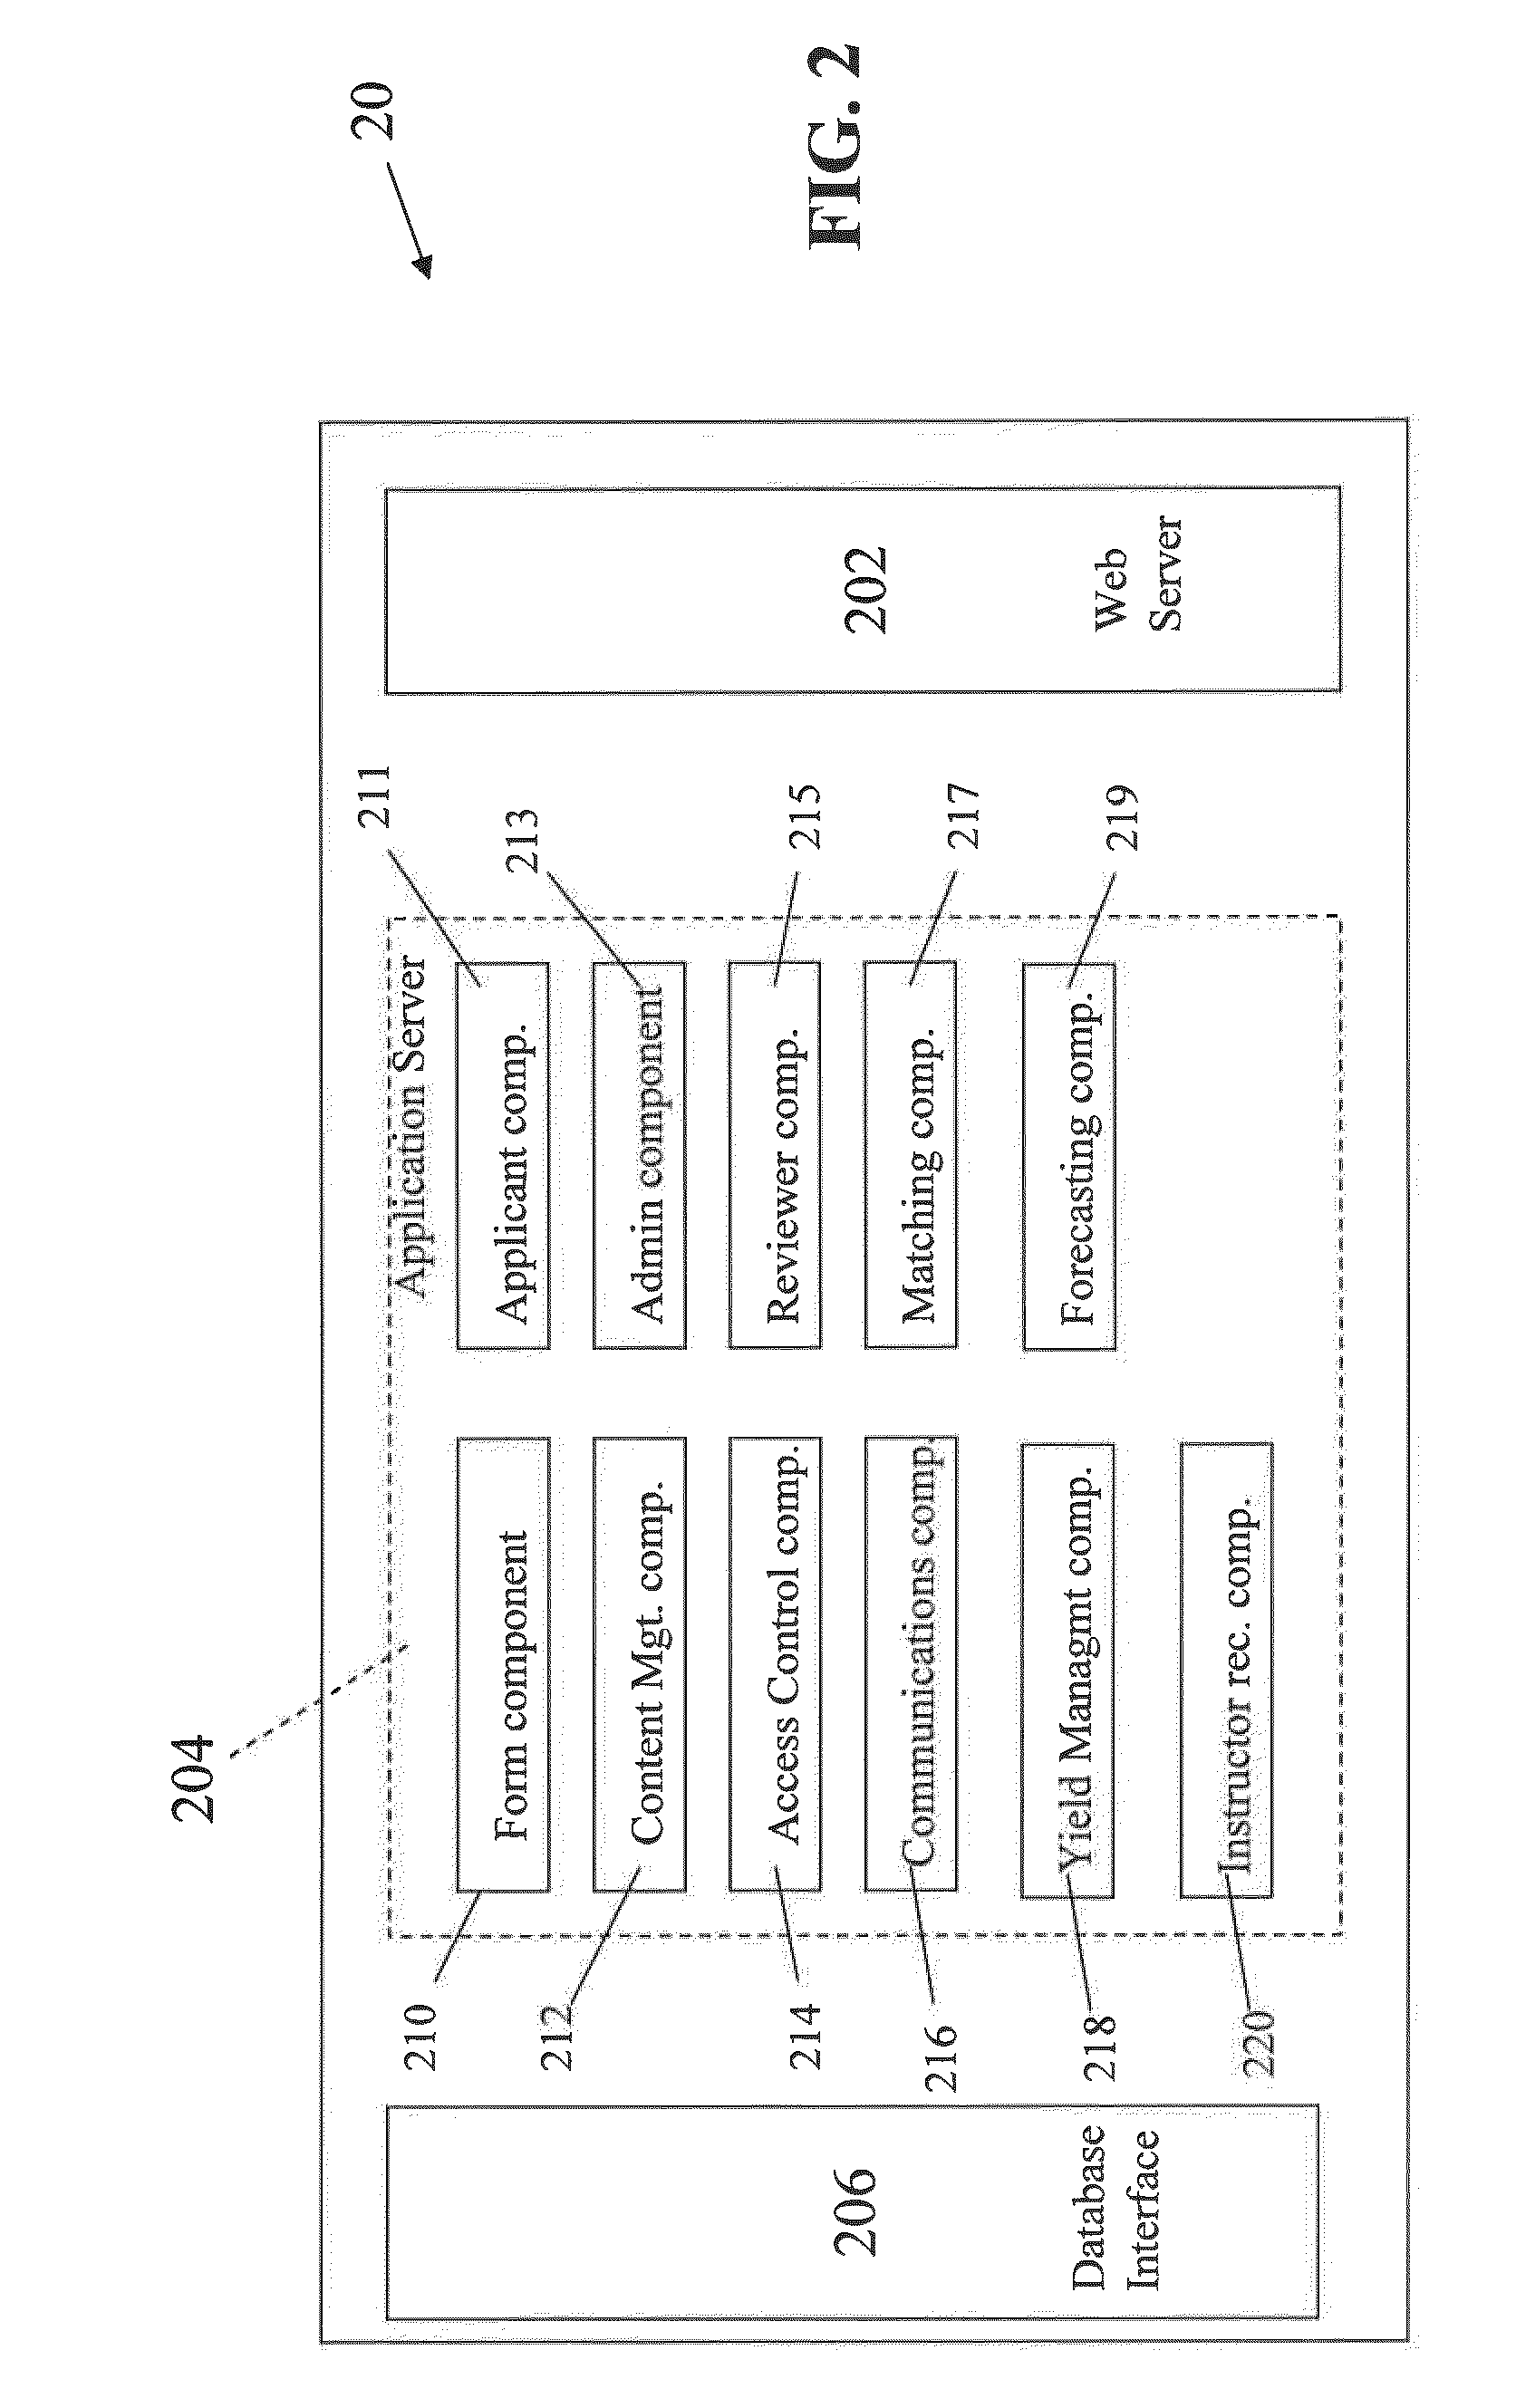 System and Method for Automated Admissions Process and Yield Rate Management